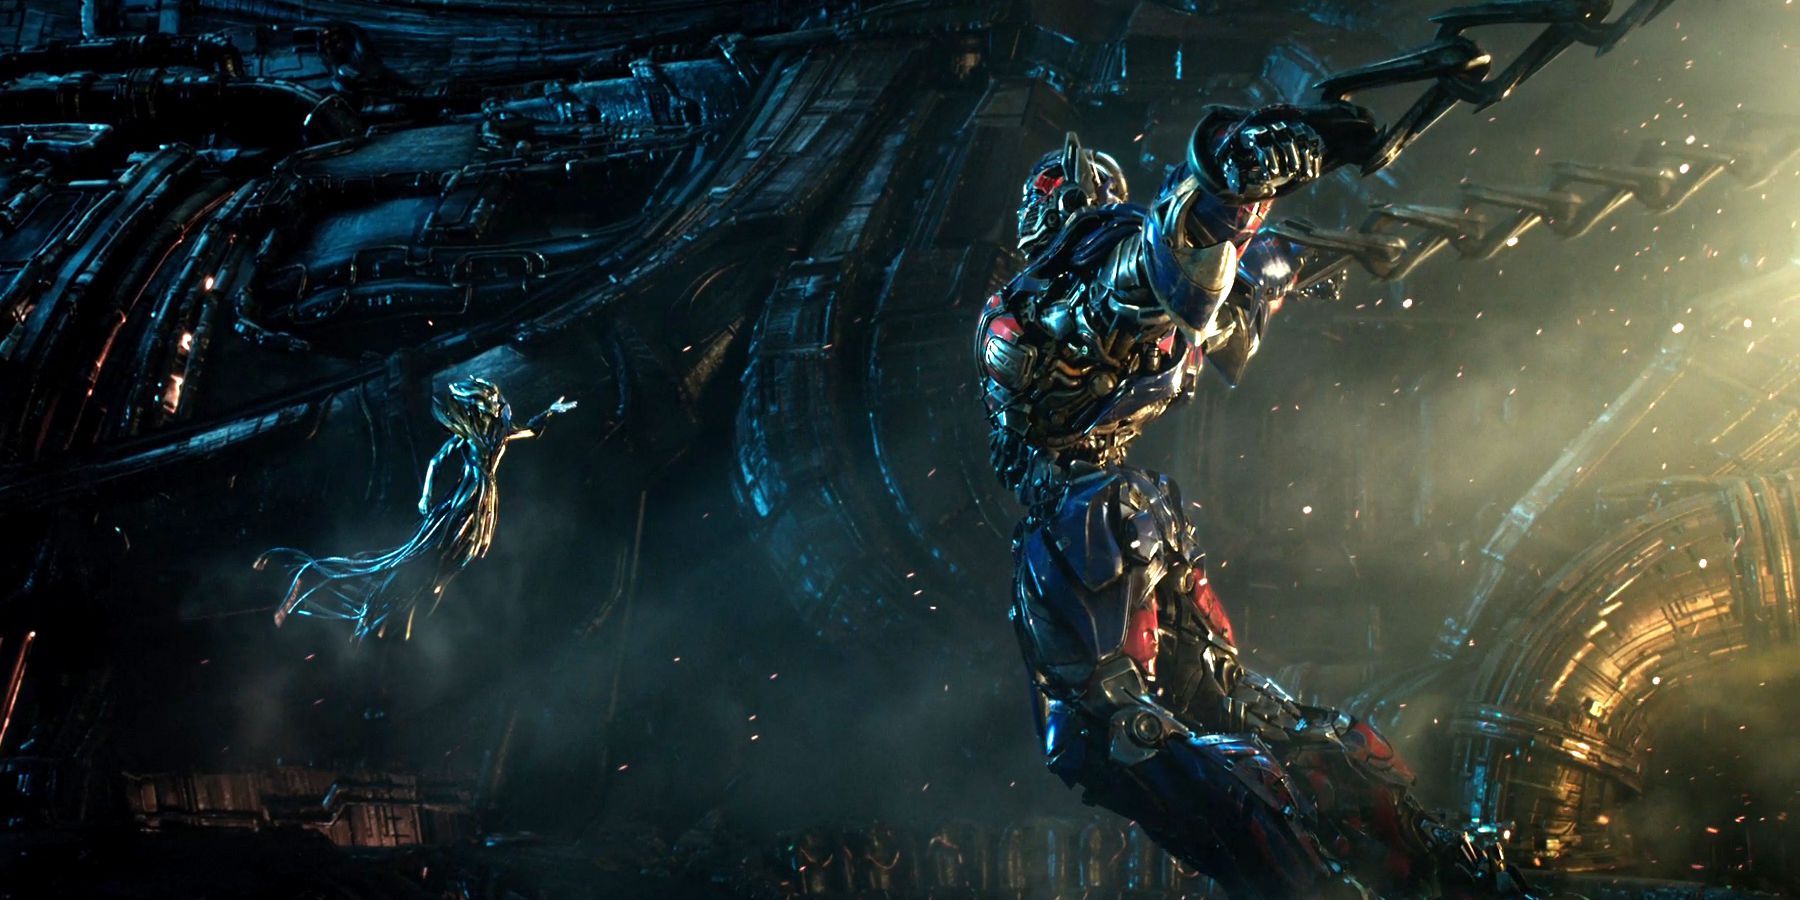 Why Michael Bay’s Transformers Movies Were So Popular (Despite Being Bad)